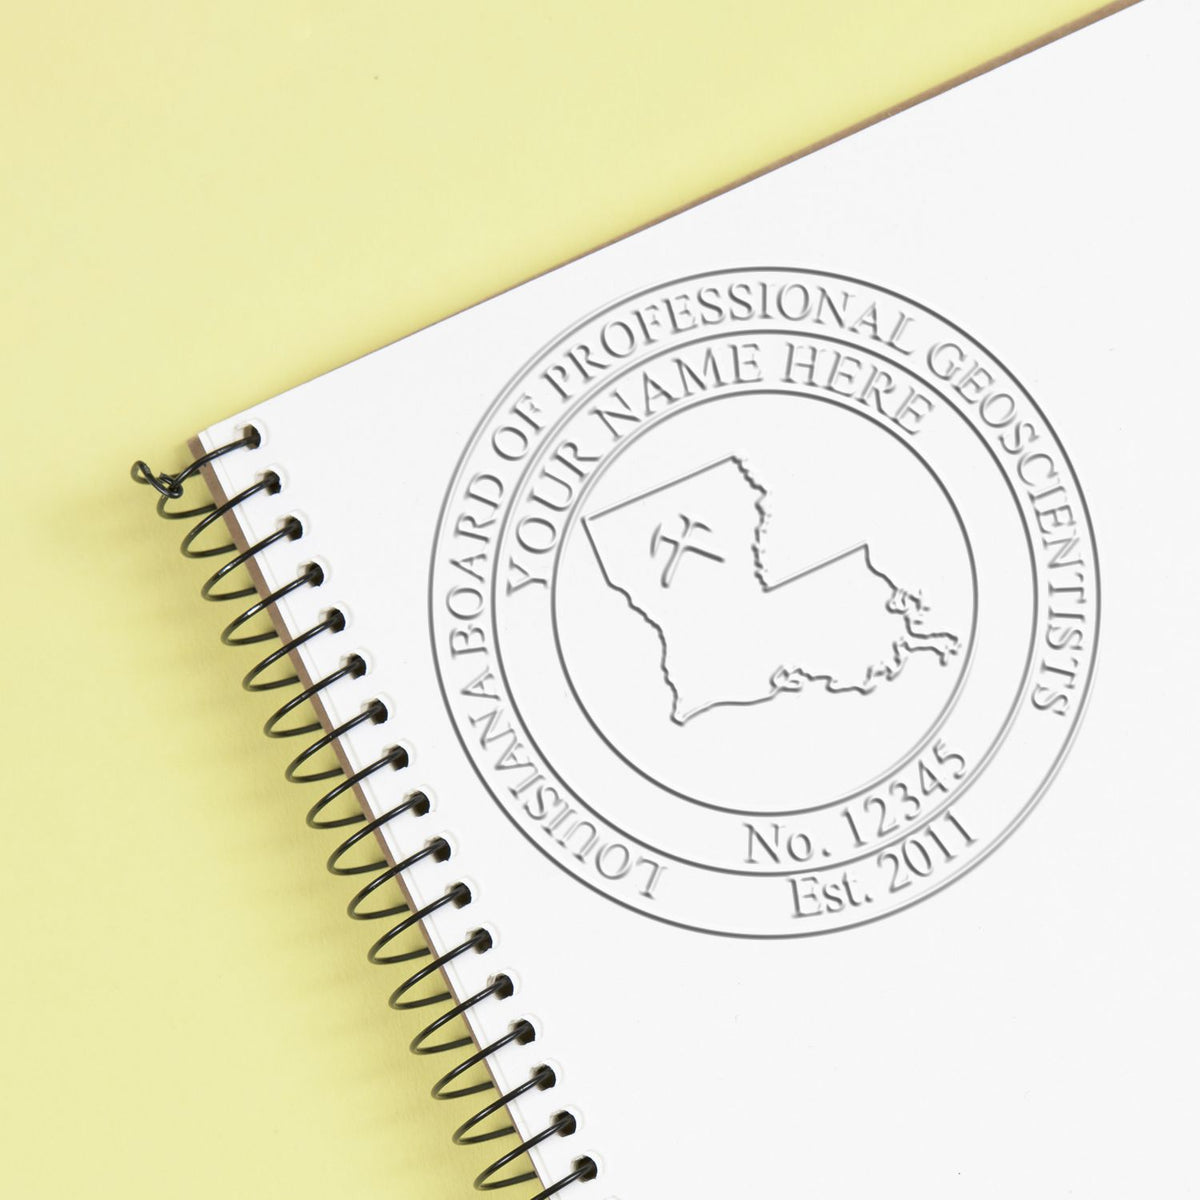 An in use photo of the Soft Louisiana Professional Geologist Seal showing a sample imprint on a cardstock